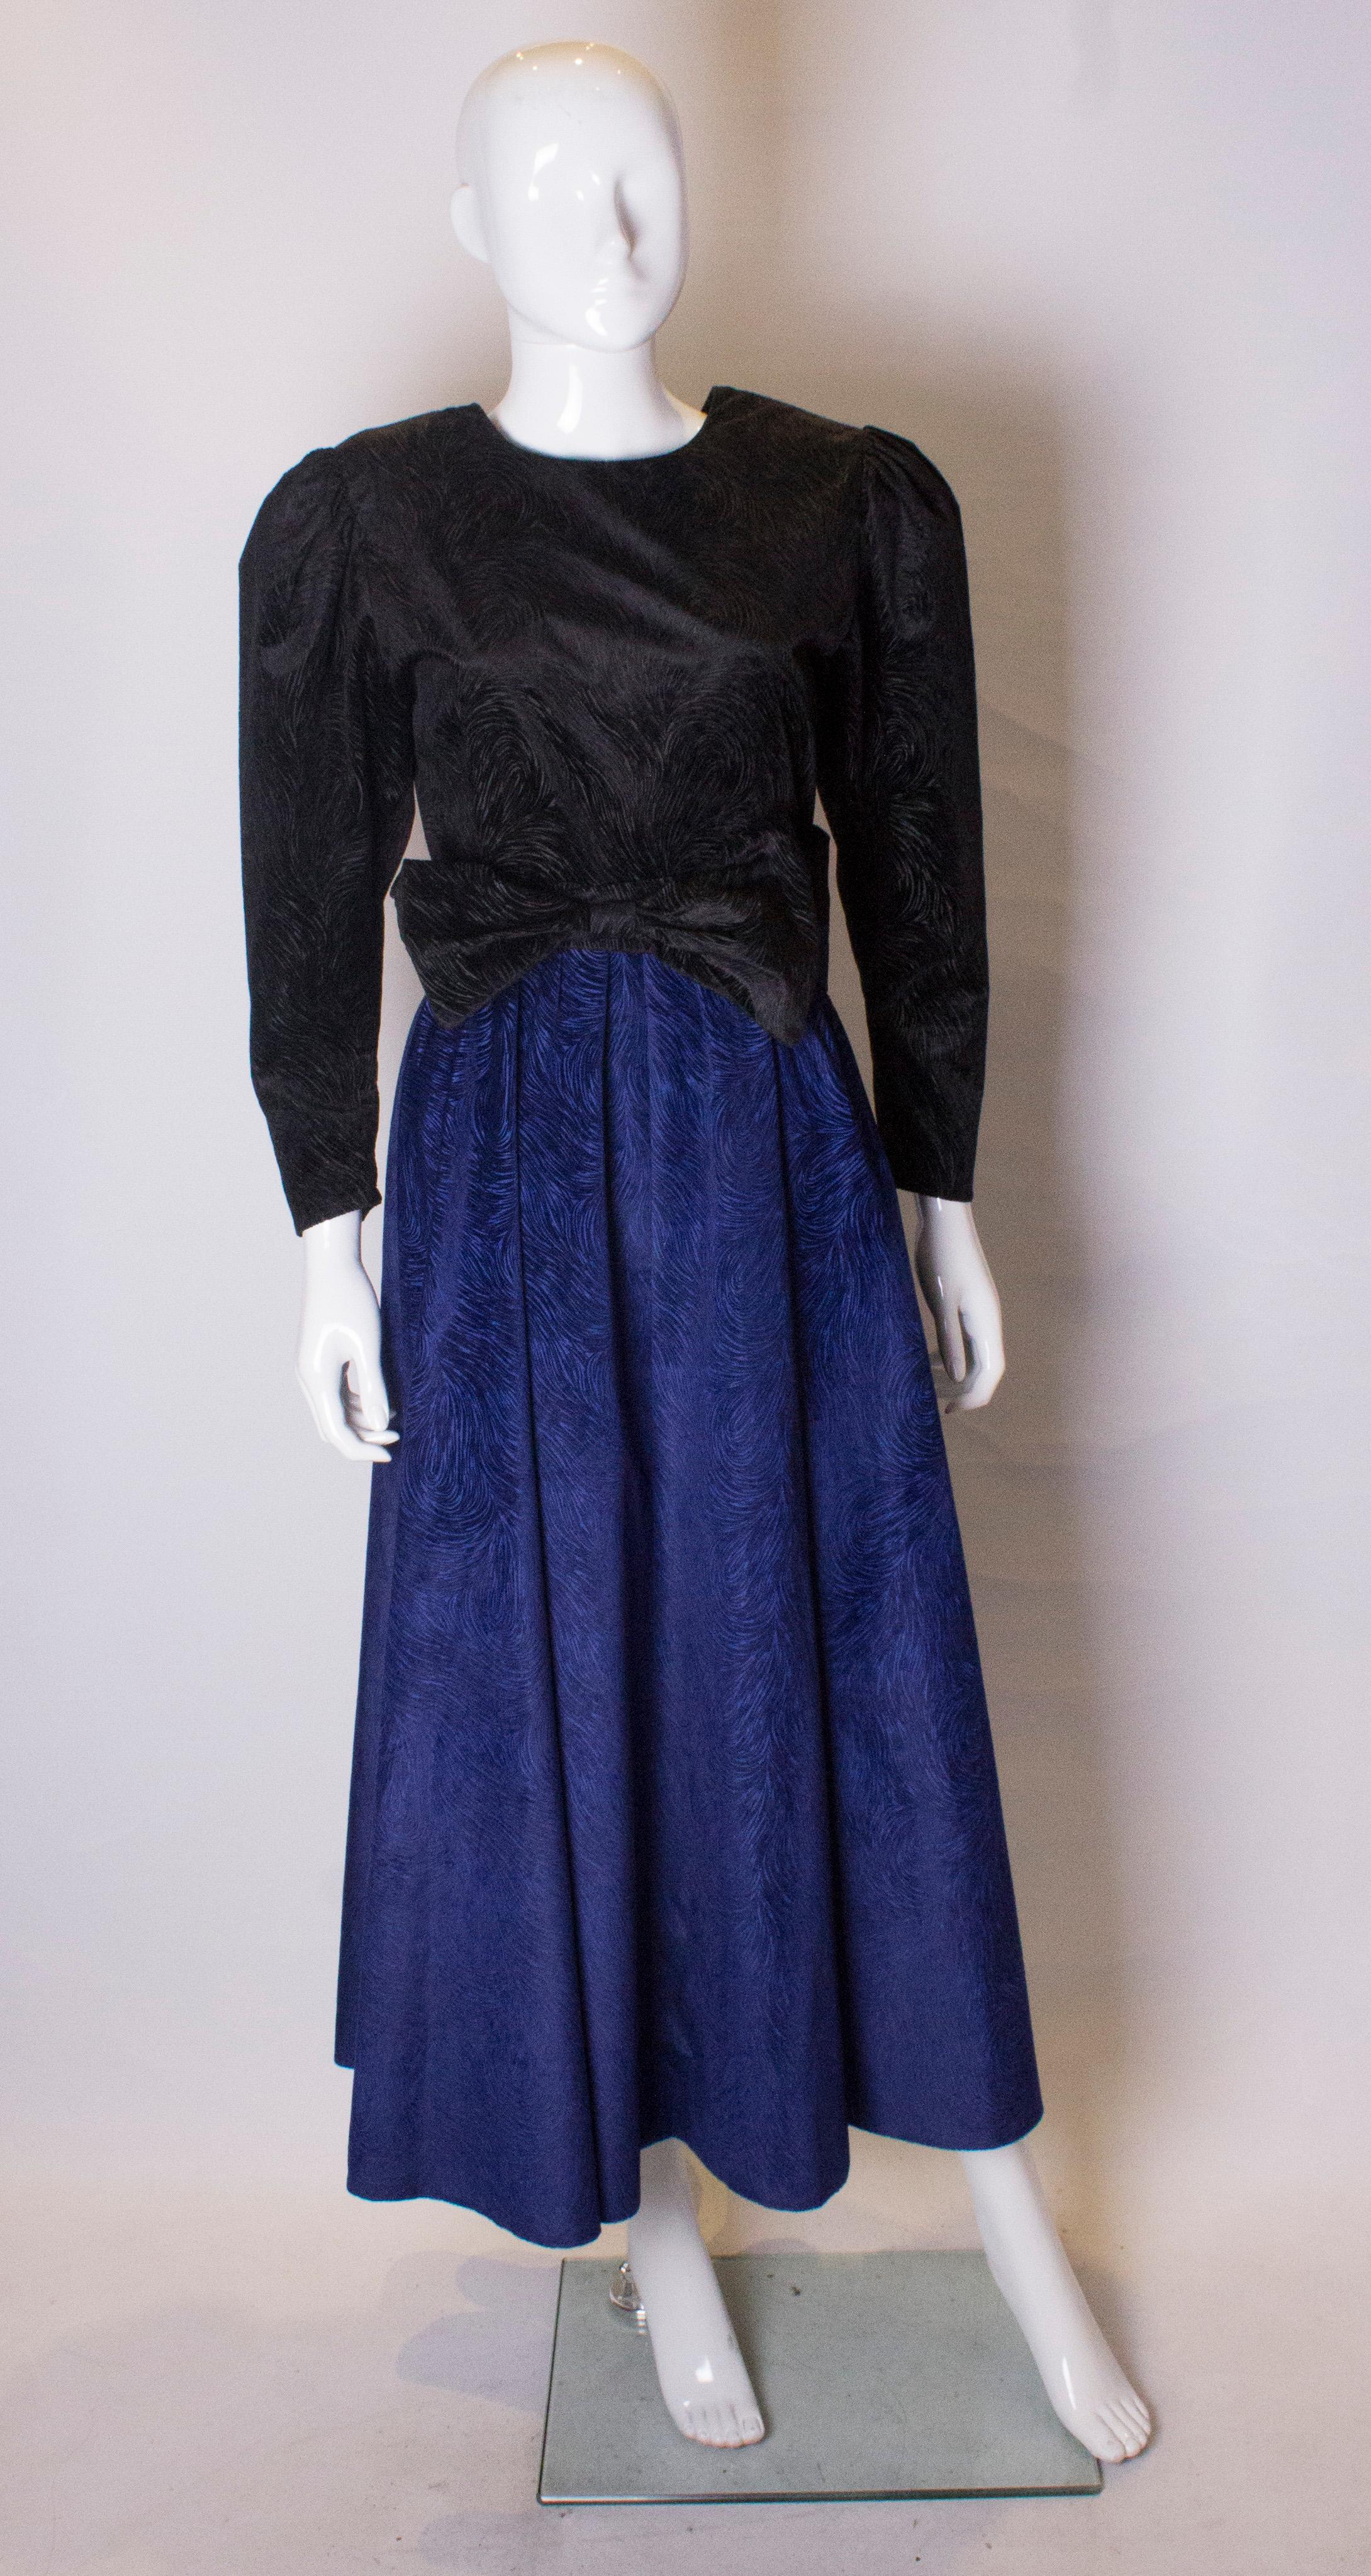 A great cocktail dress by Irish designer Hagarty. In a lovely devorre like fabric the dress has  a v backline , gathered puff sleaves and a full skirt. 